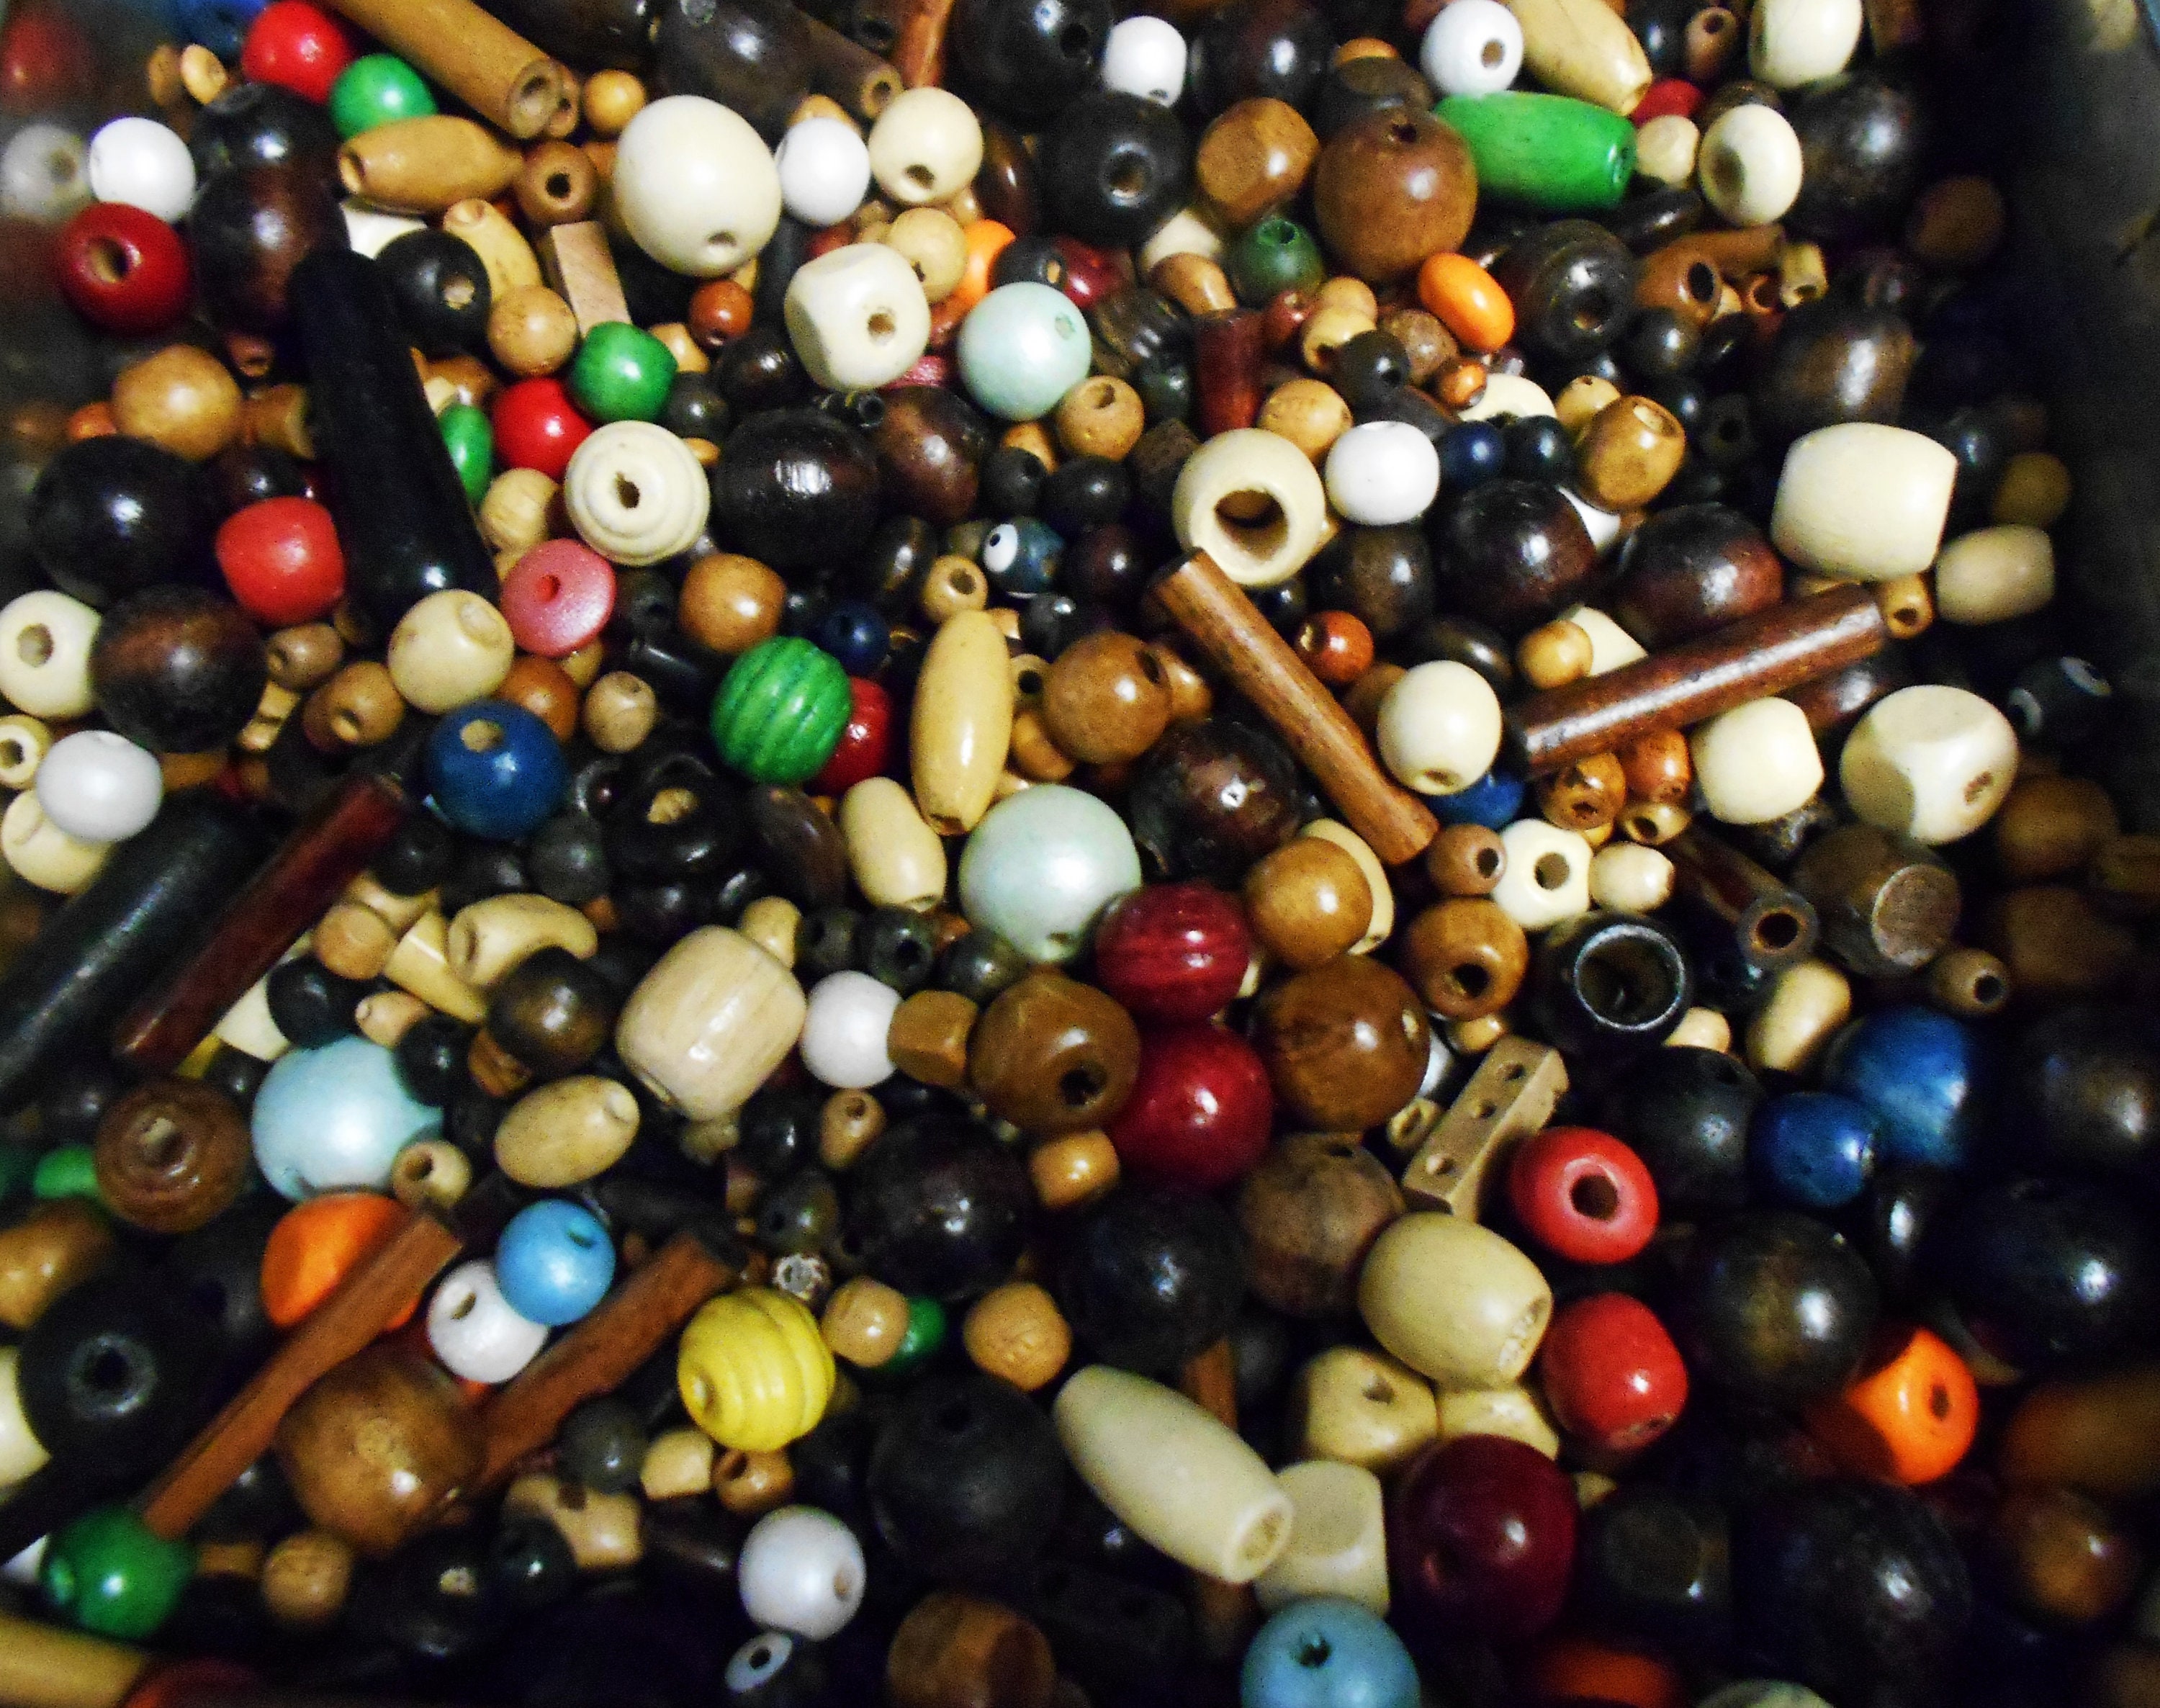 Wood Beads,4mm/6mm/8mm/10mm/12mm/14mm/16mm/18mm/20mm/25mm/30mm/35mm Round  Natural Unfinished Wooden Beads,diy Beads 